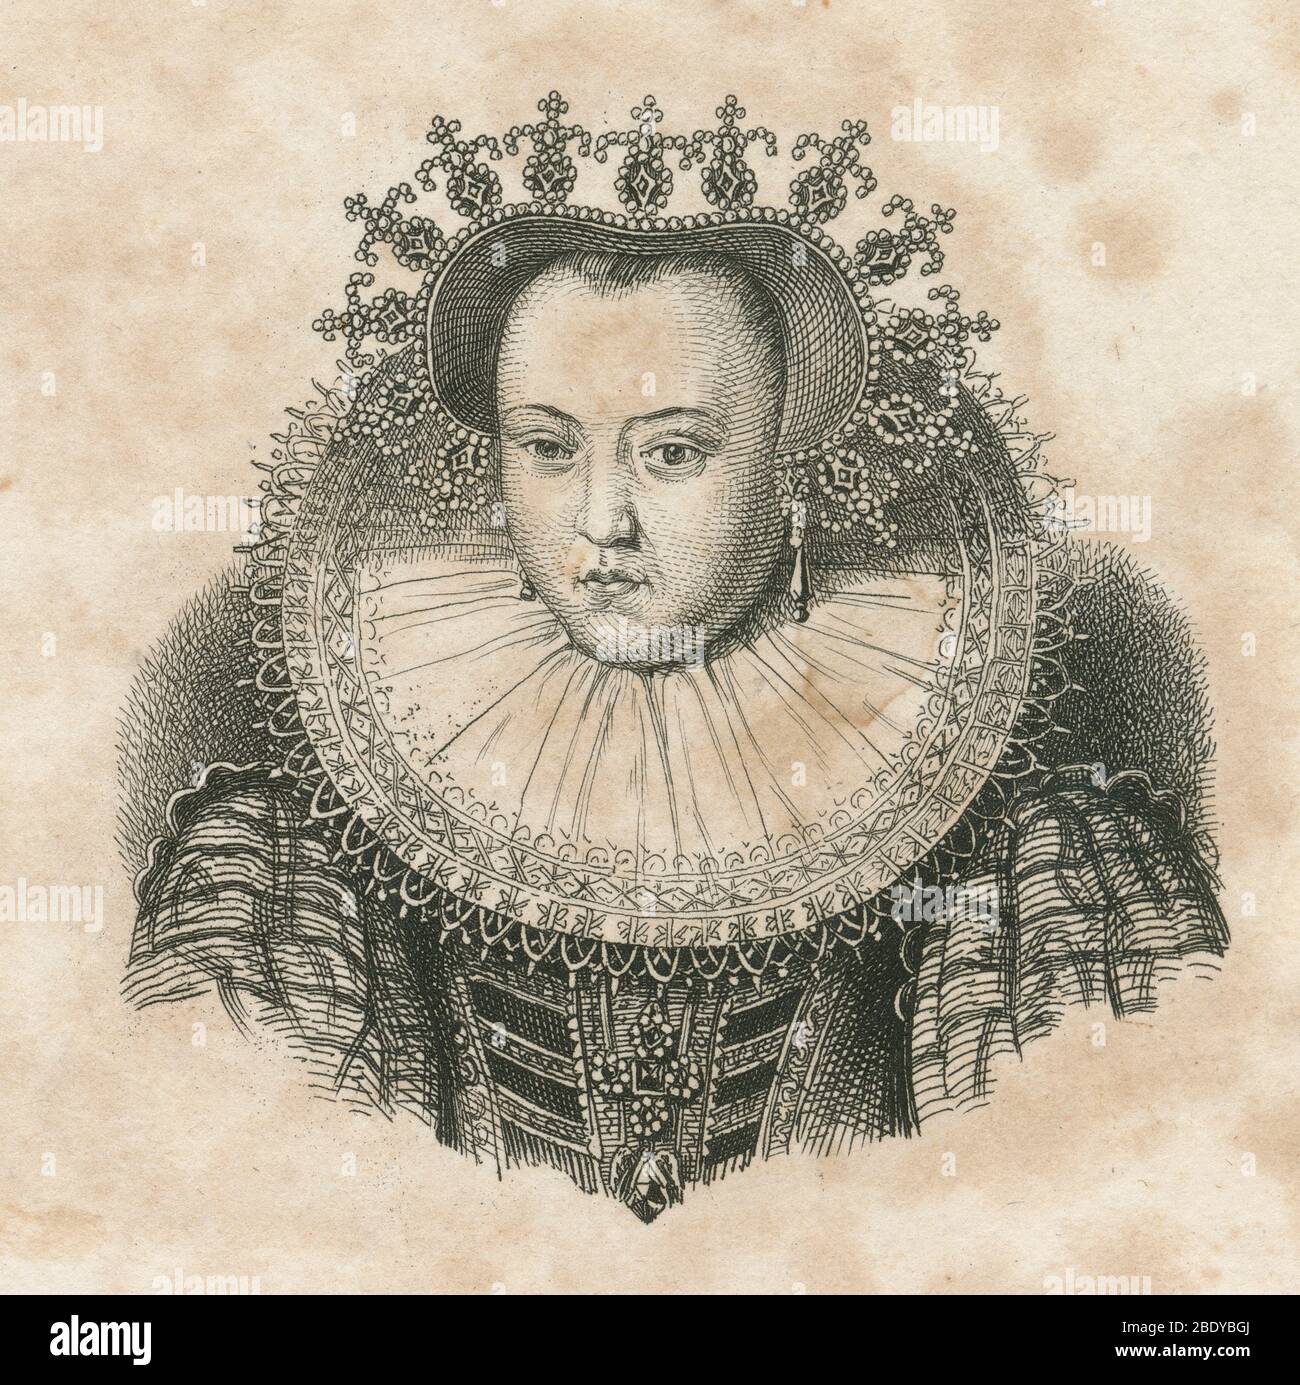 Antique engraving, Sophie of Brandenburg. Sophie of Brandenburg (1568-1622) was Electress of Saxony by marriage to Christian I, Elector of Saxony. SOURCE: ORIGINAL ENGRAVING Stock Photo